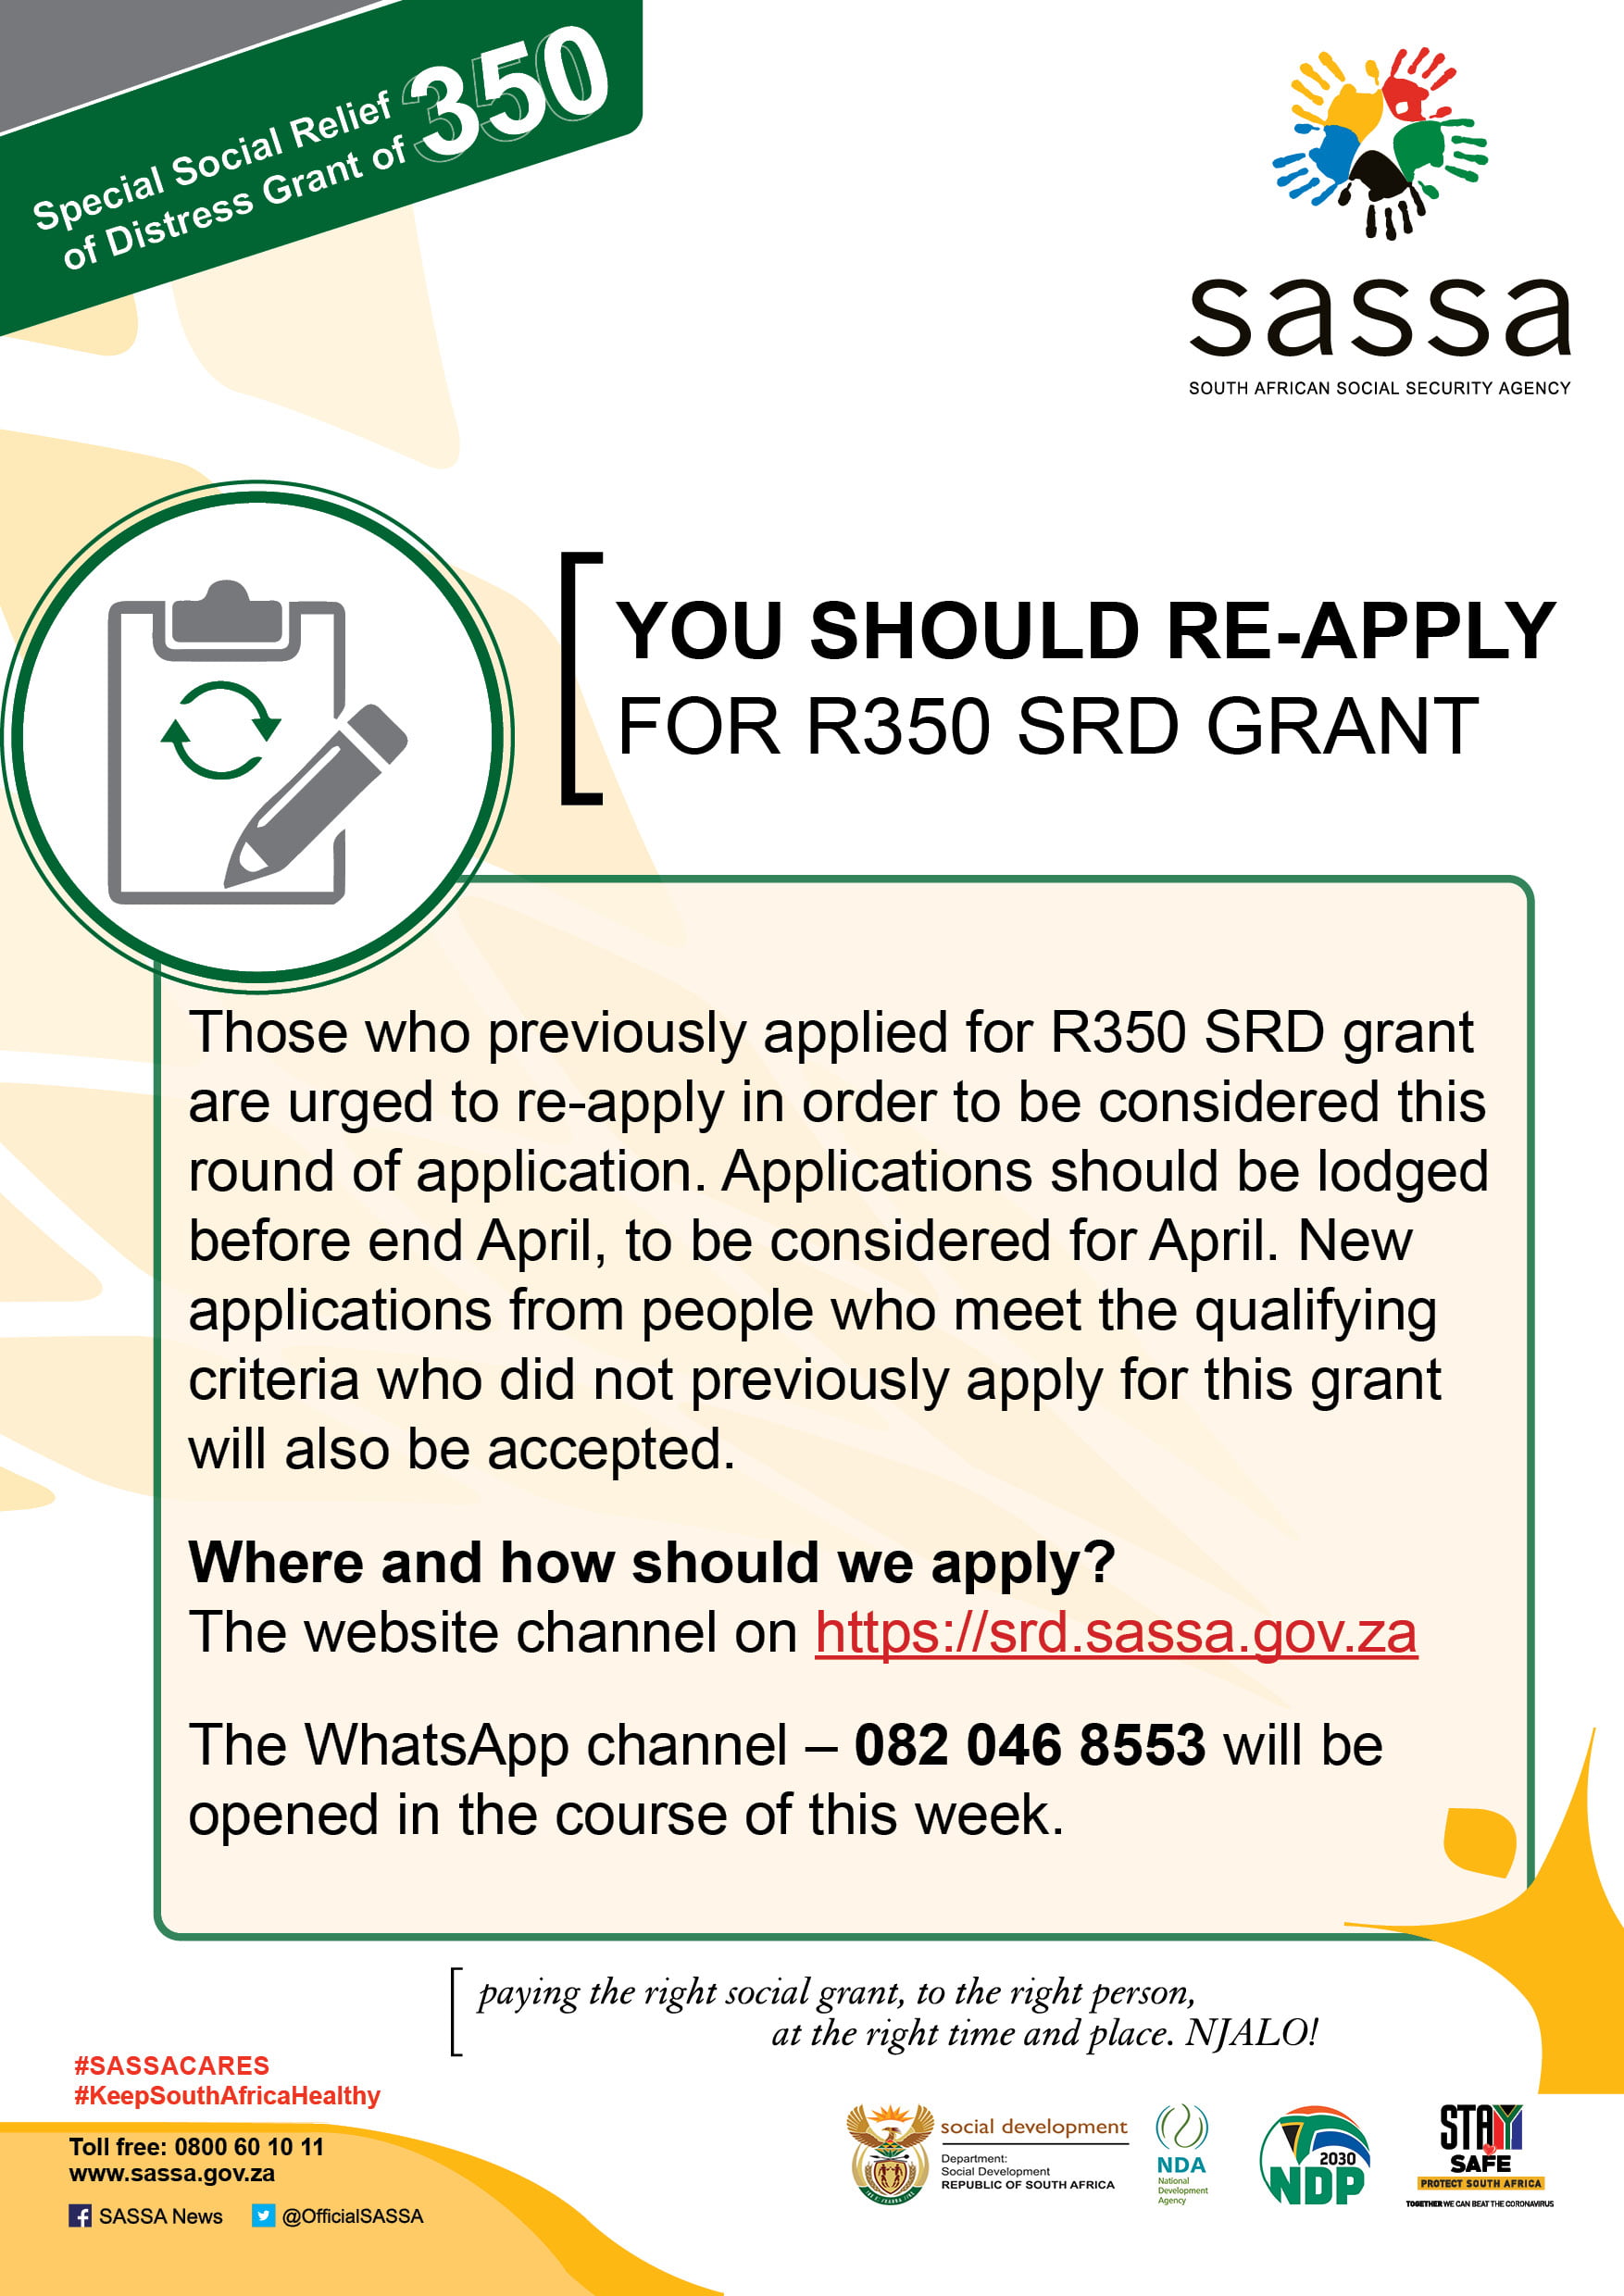 How to Re-Apply For R350 SRD Grant